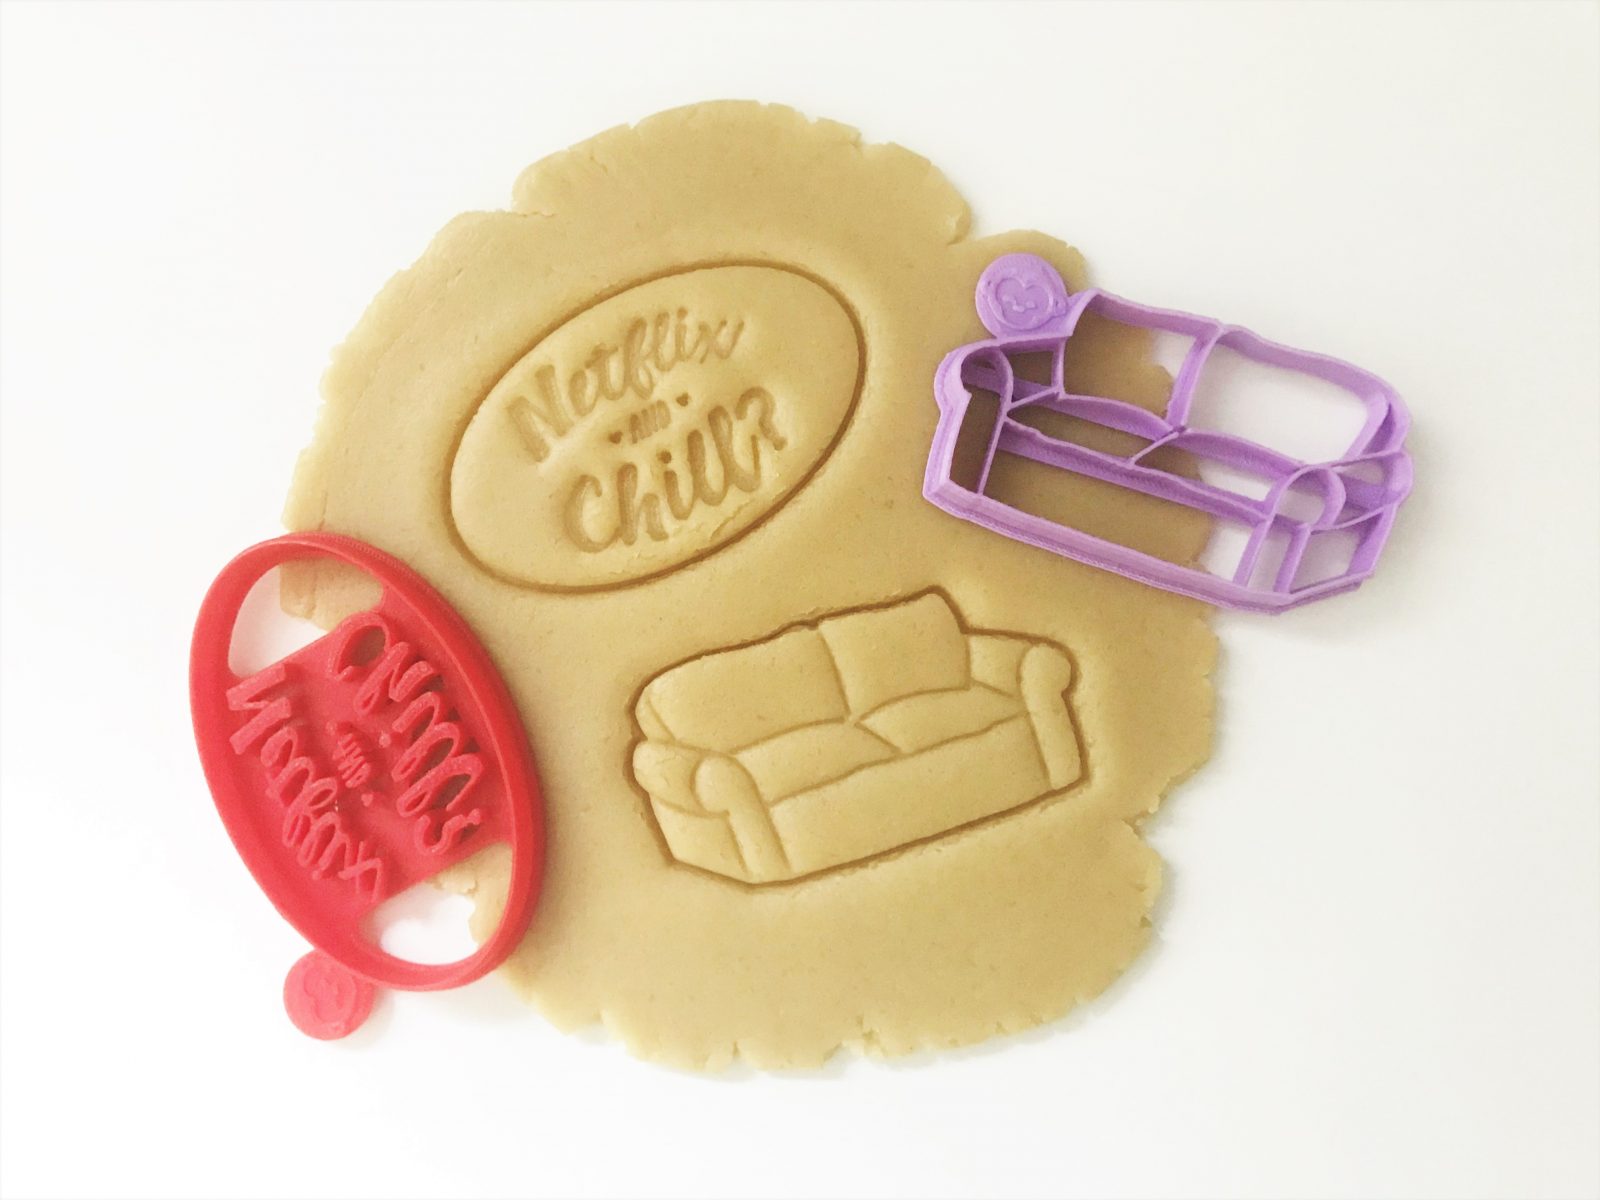 netflix and chill cookie cutter